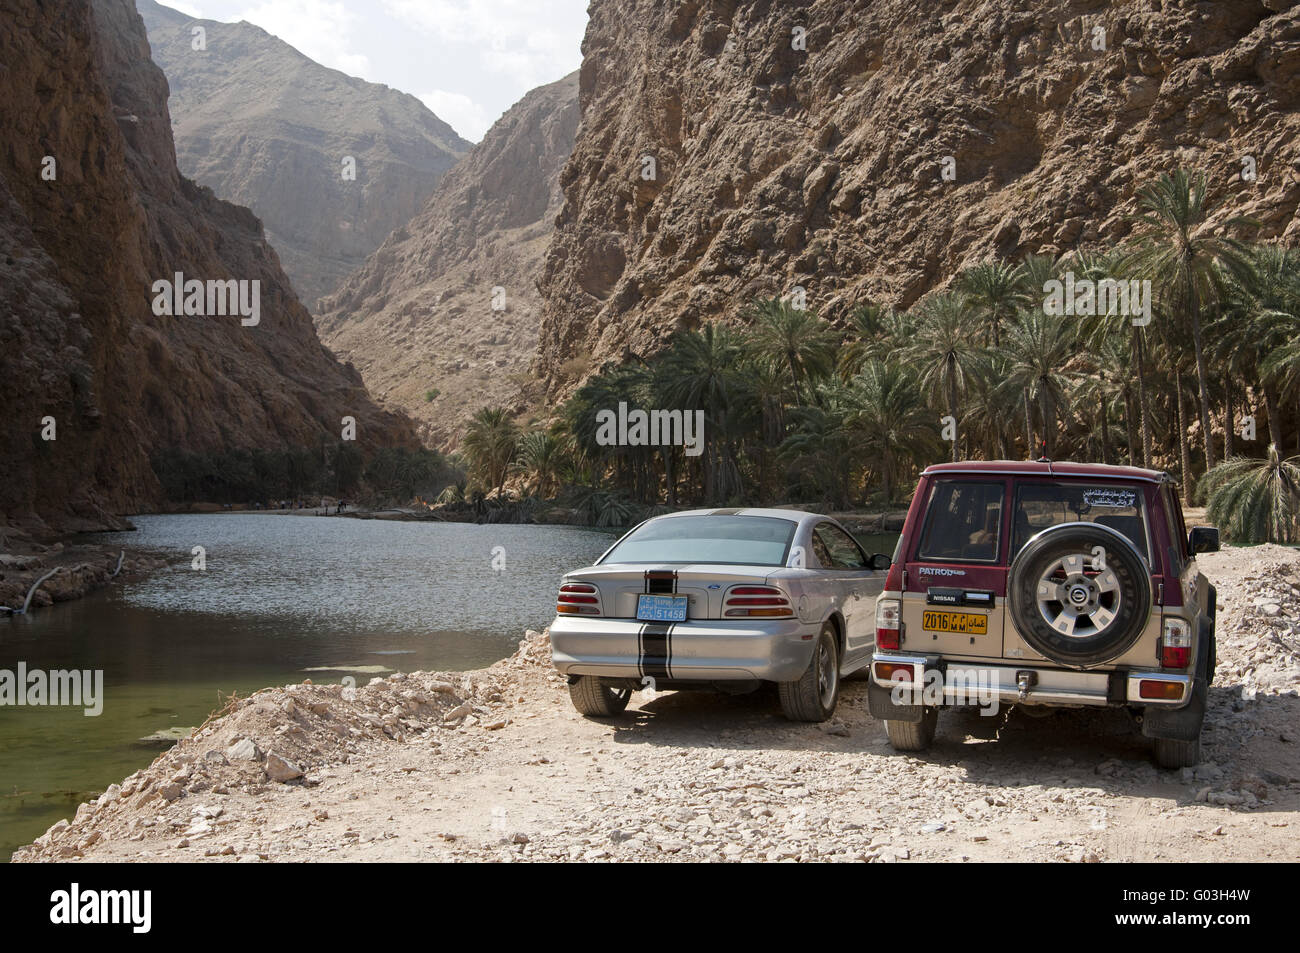 vehicles parking at the entrance to the Wadi Shab Stock Photo